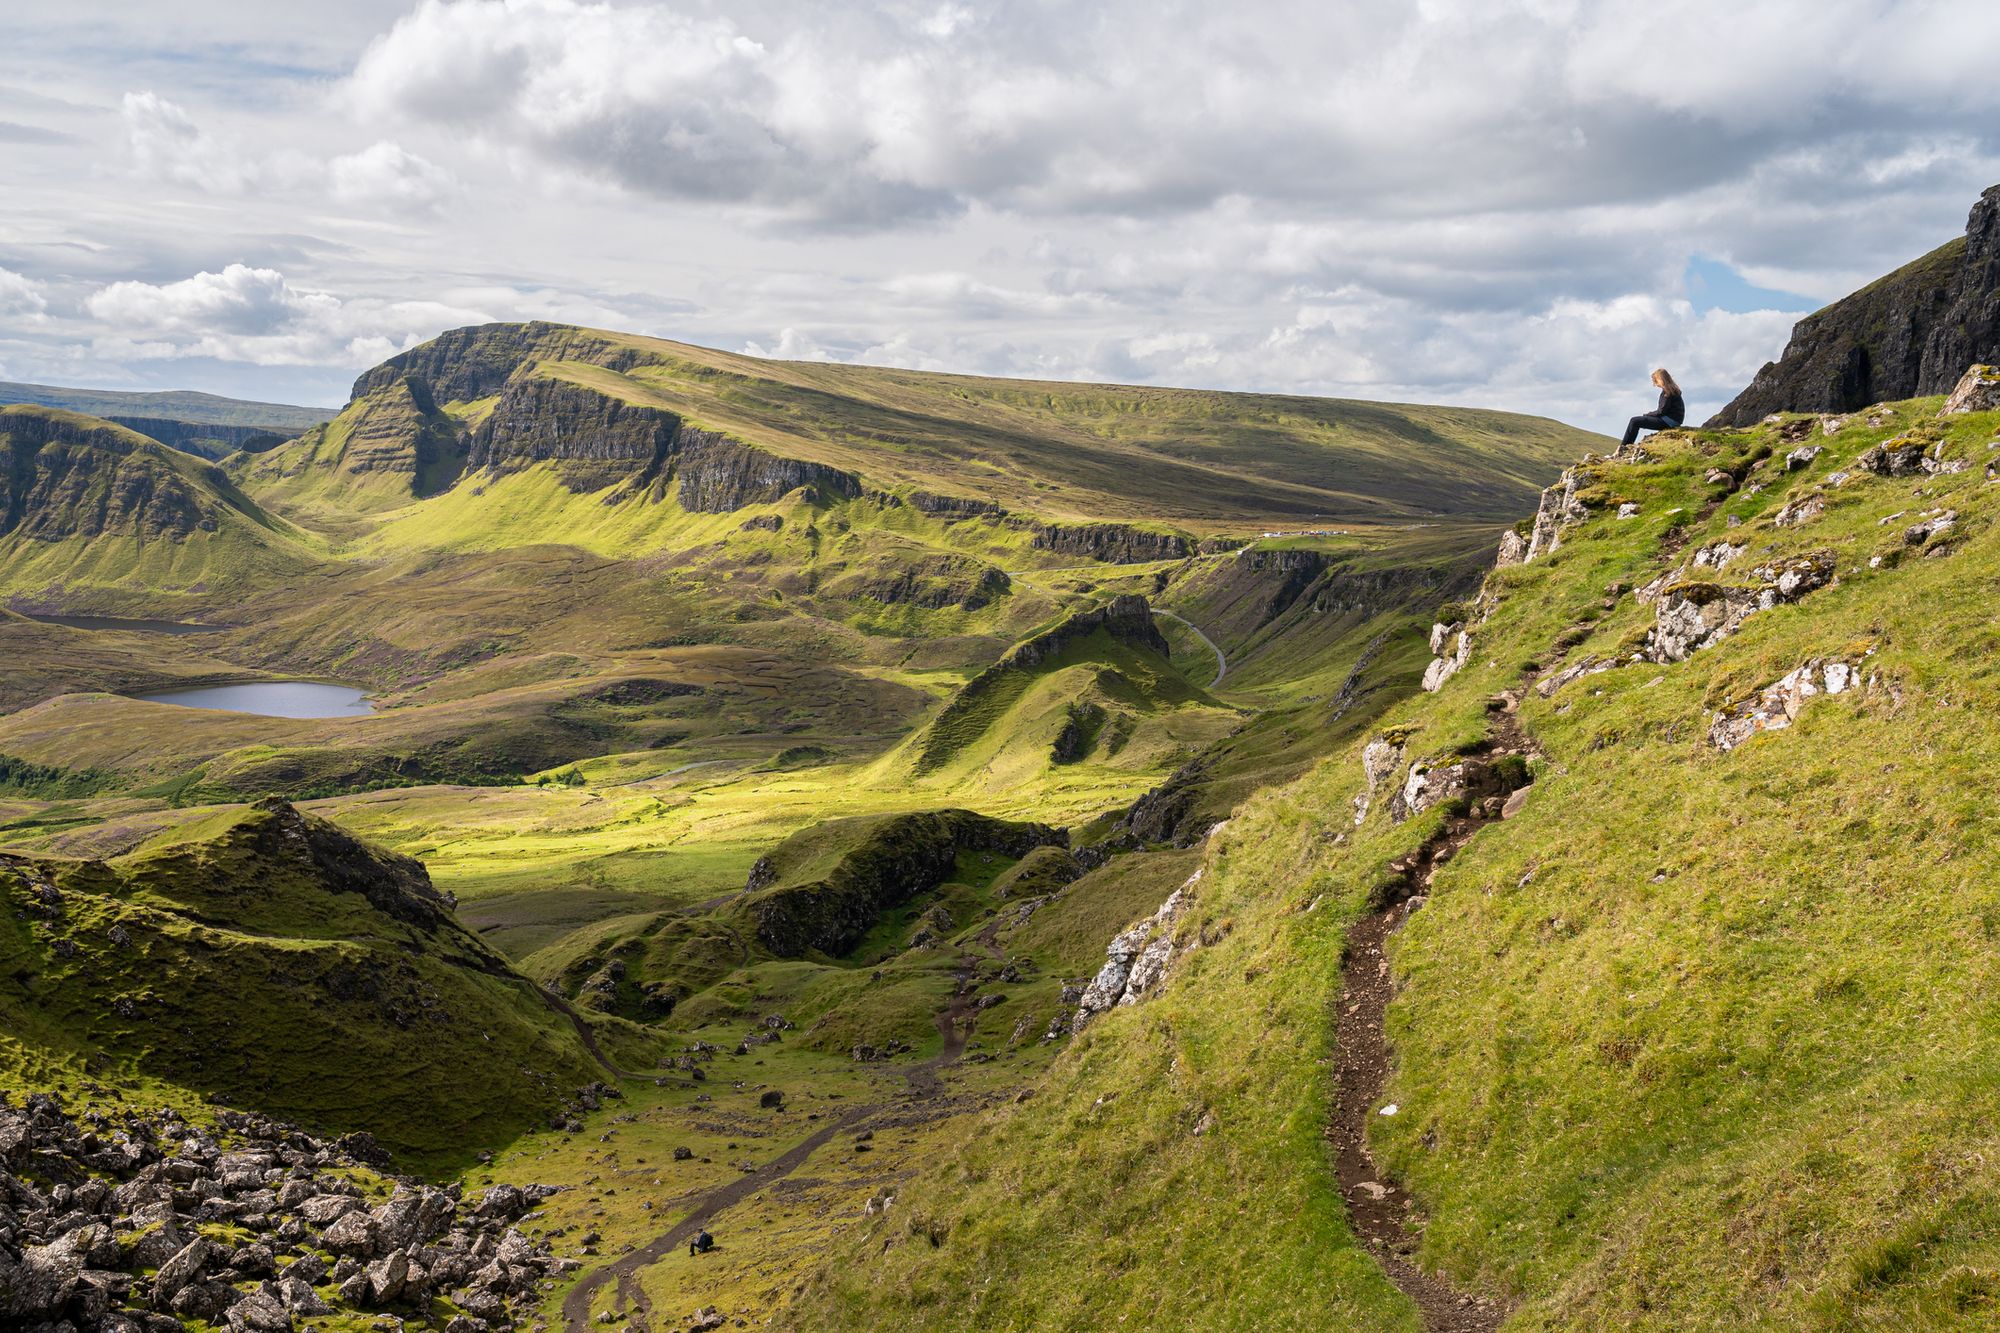 The Quiraing on the Isle of Skye, known for its lochs and remarkable panoramic views